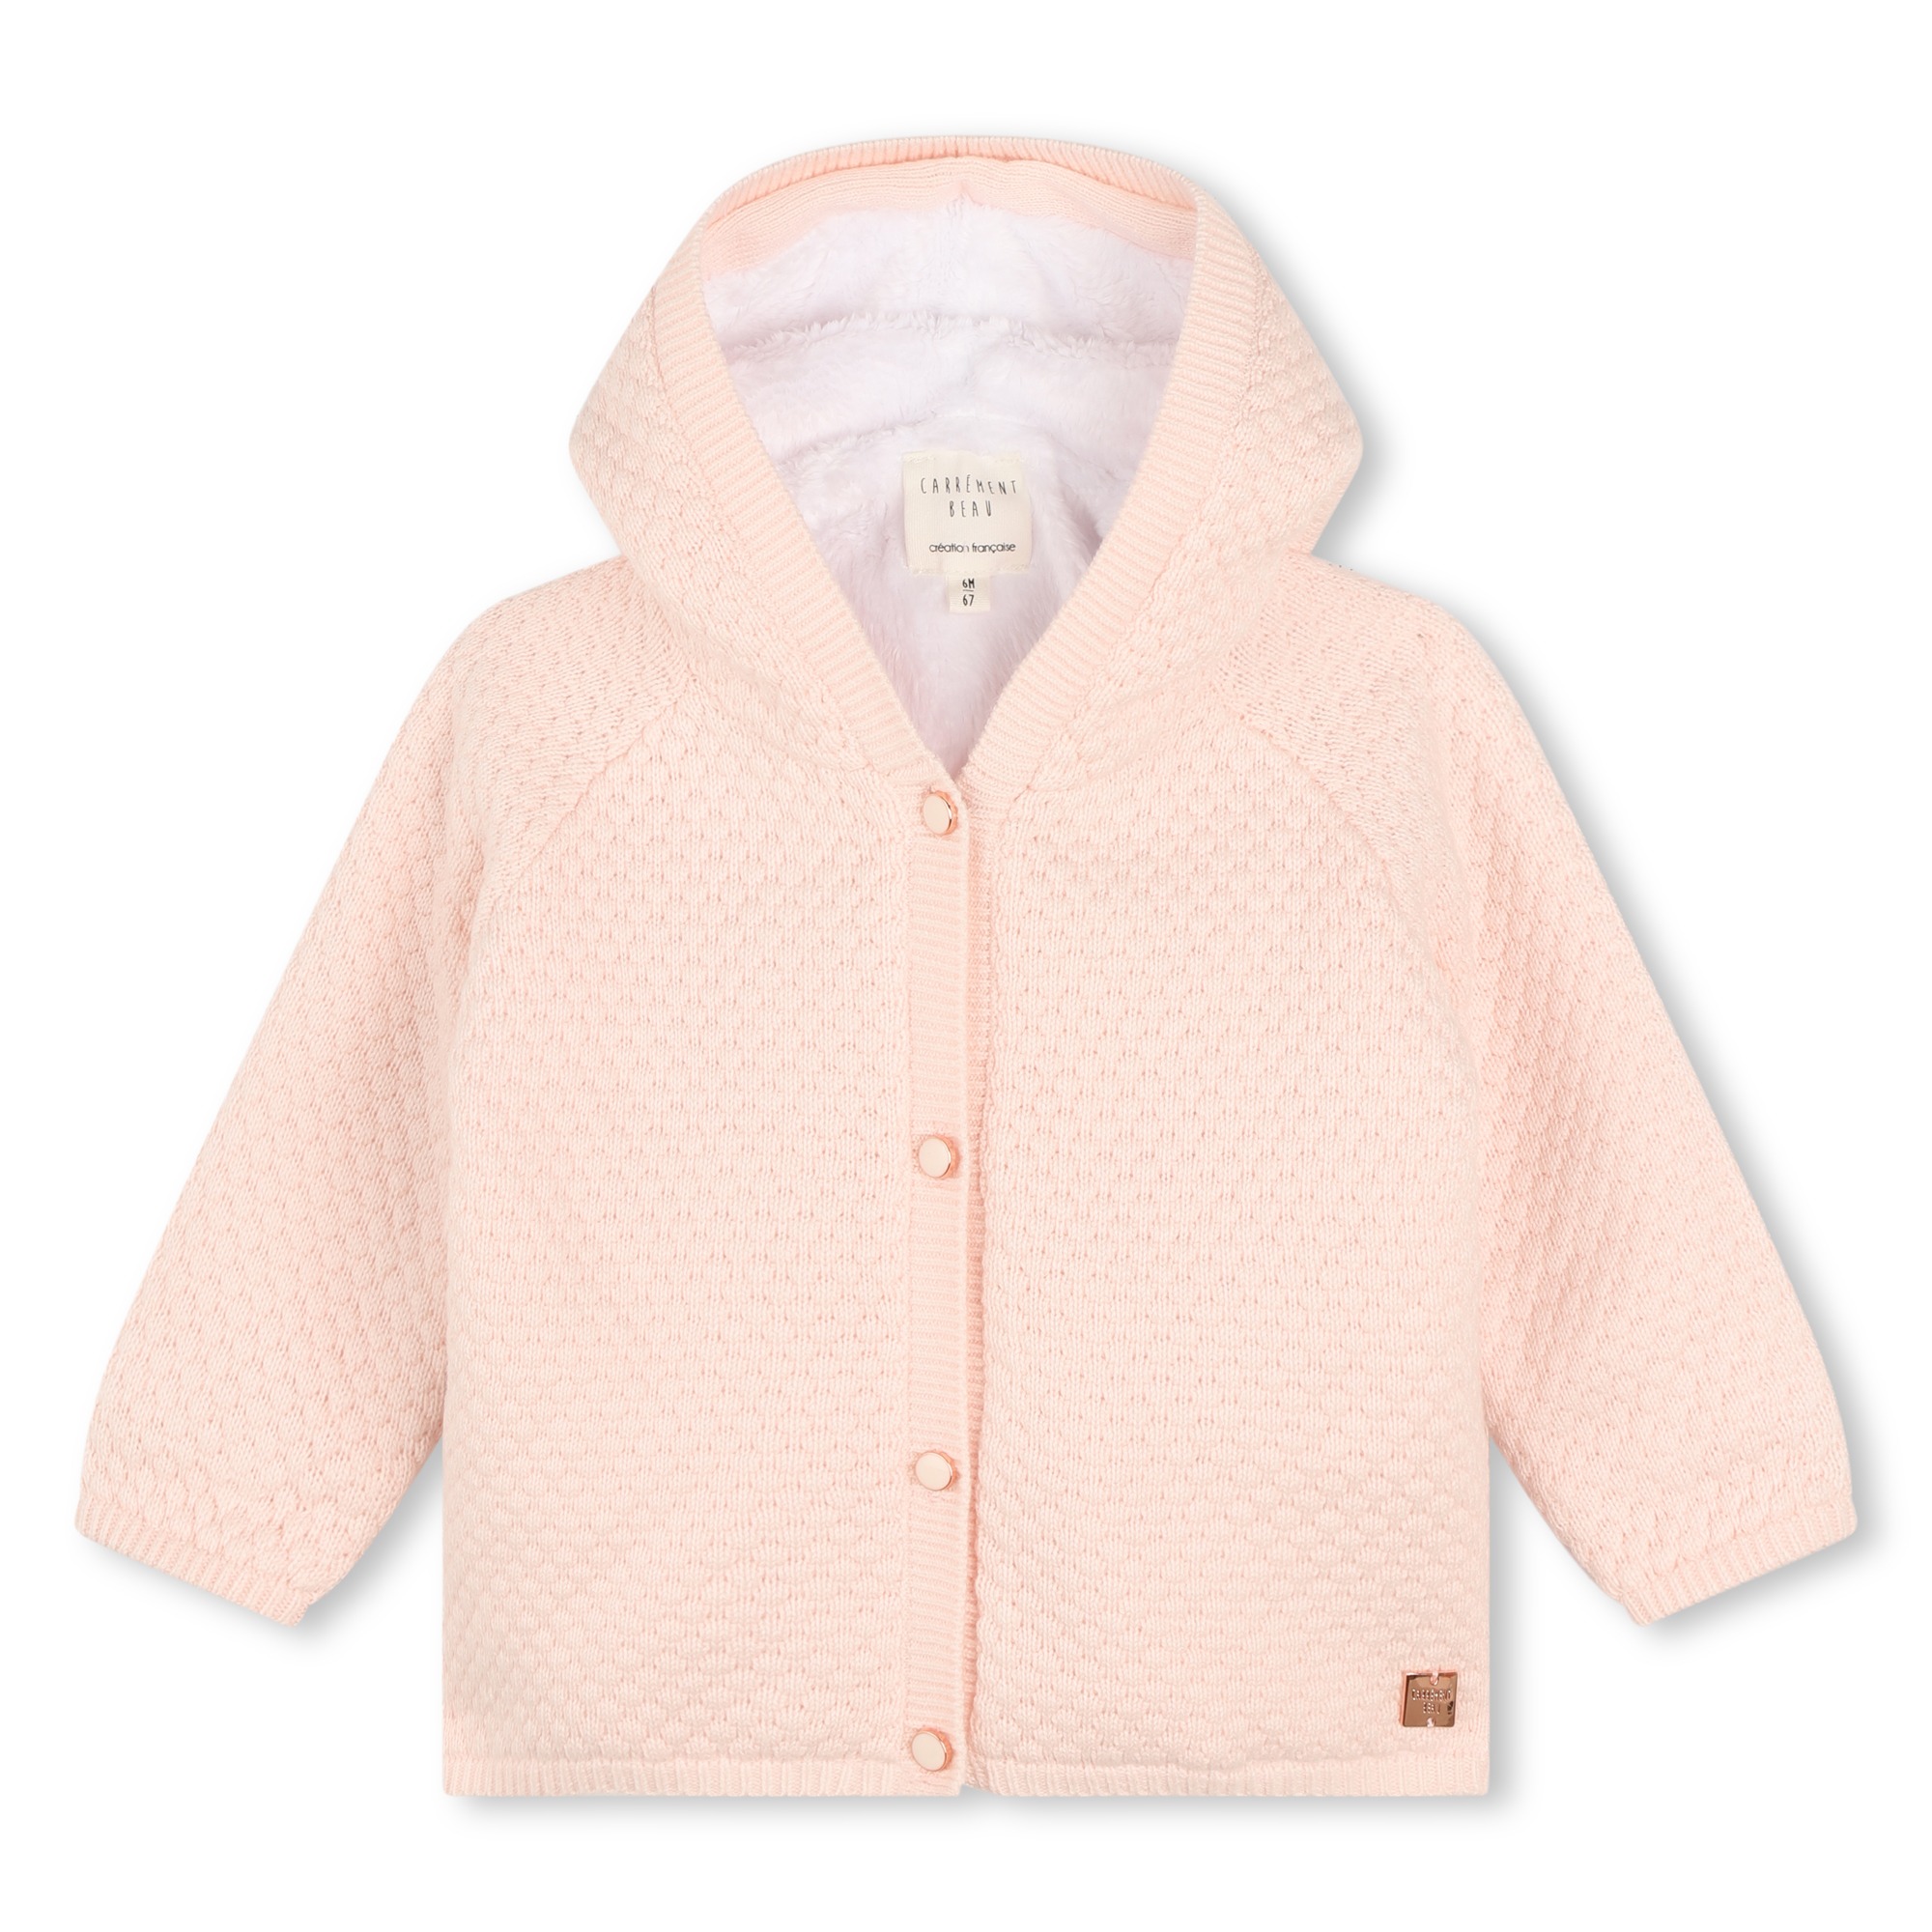 Buttoned tricot jacket CARREMENT BEAU for GIRL